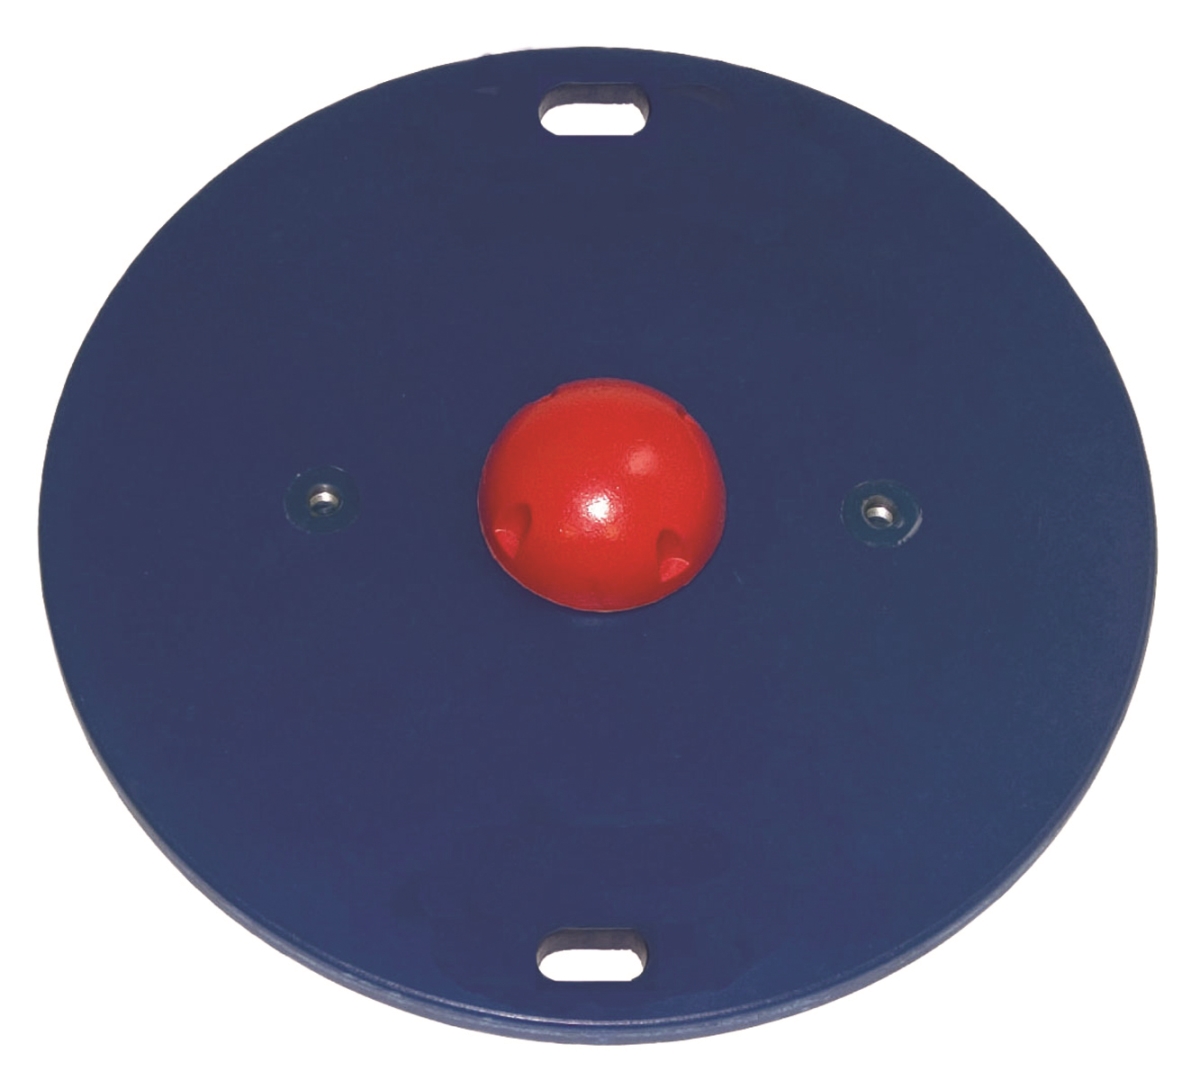 Picture of Cando 10-2021 16 in. Balance Combo Circular Wobble & Rocker Board, Red